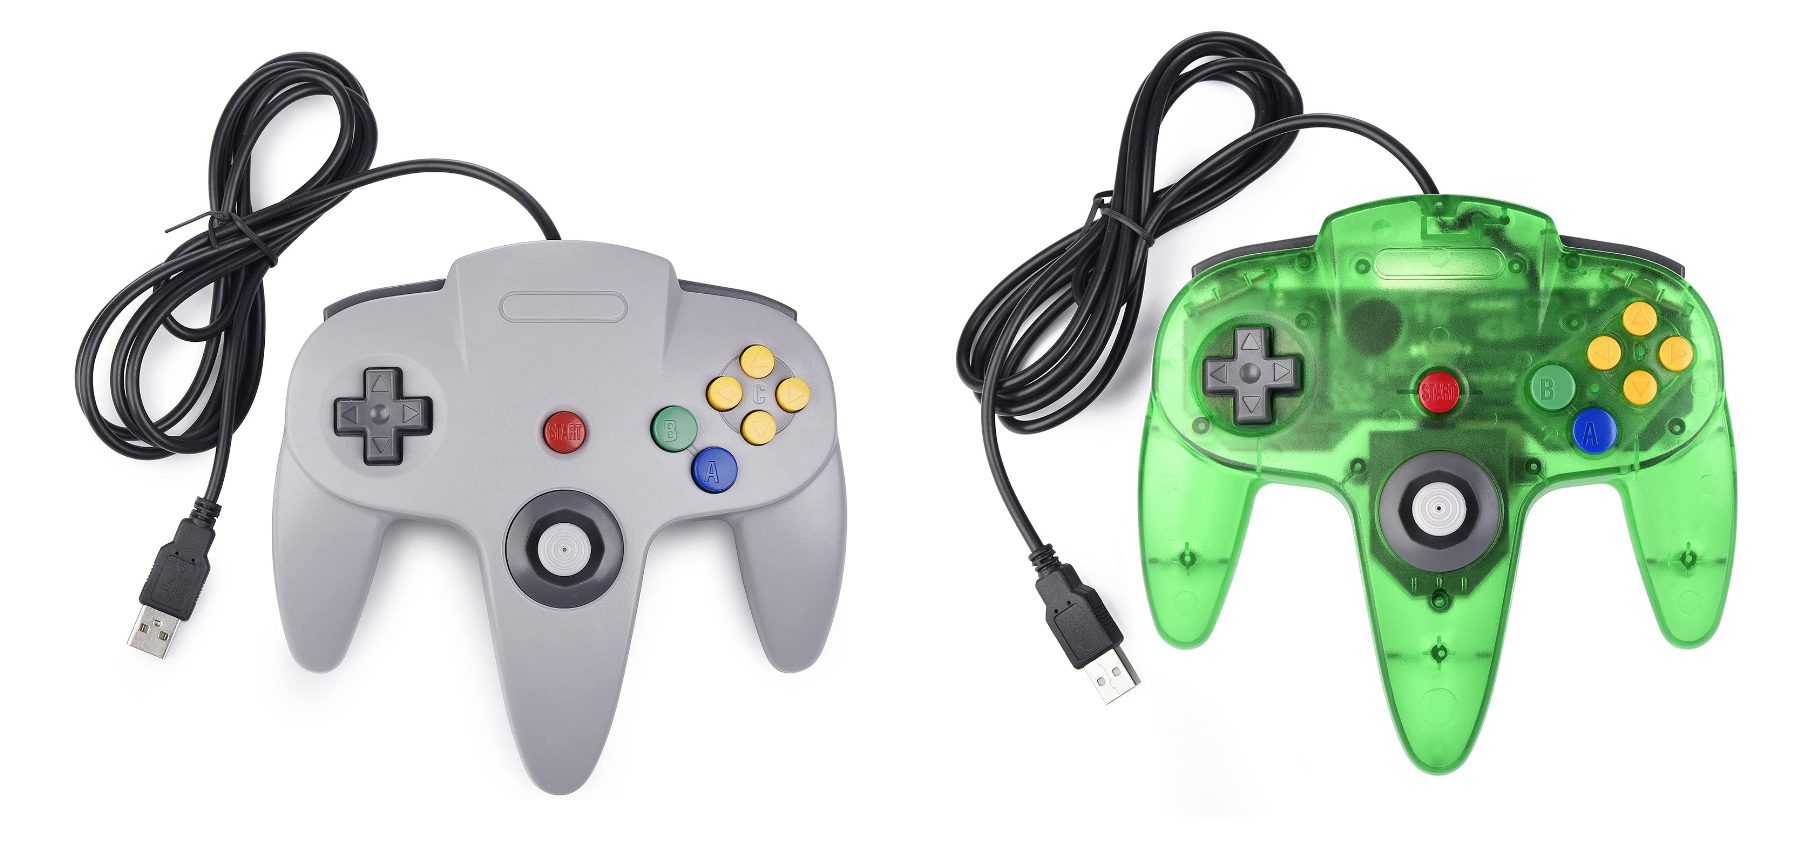 Grey 3rd Party Classic Retro N64 Bit USB Wired Controller for PC and MAC 